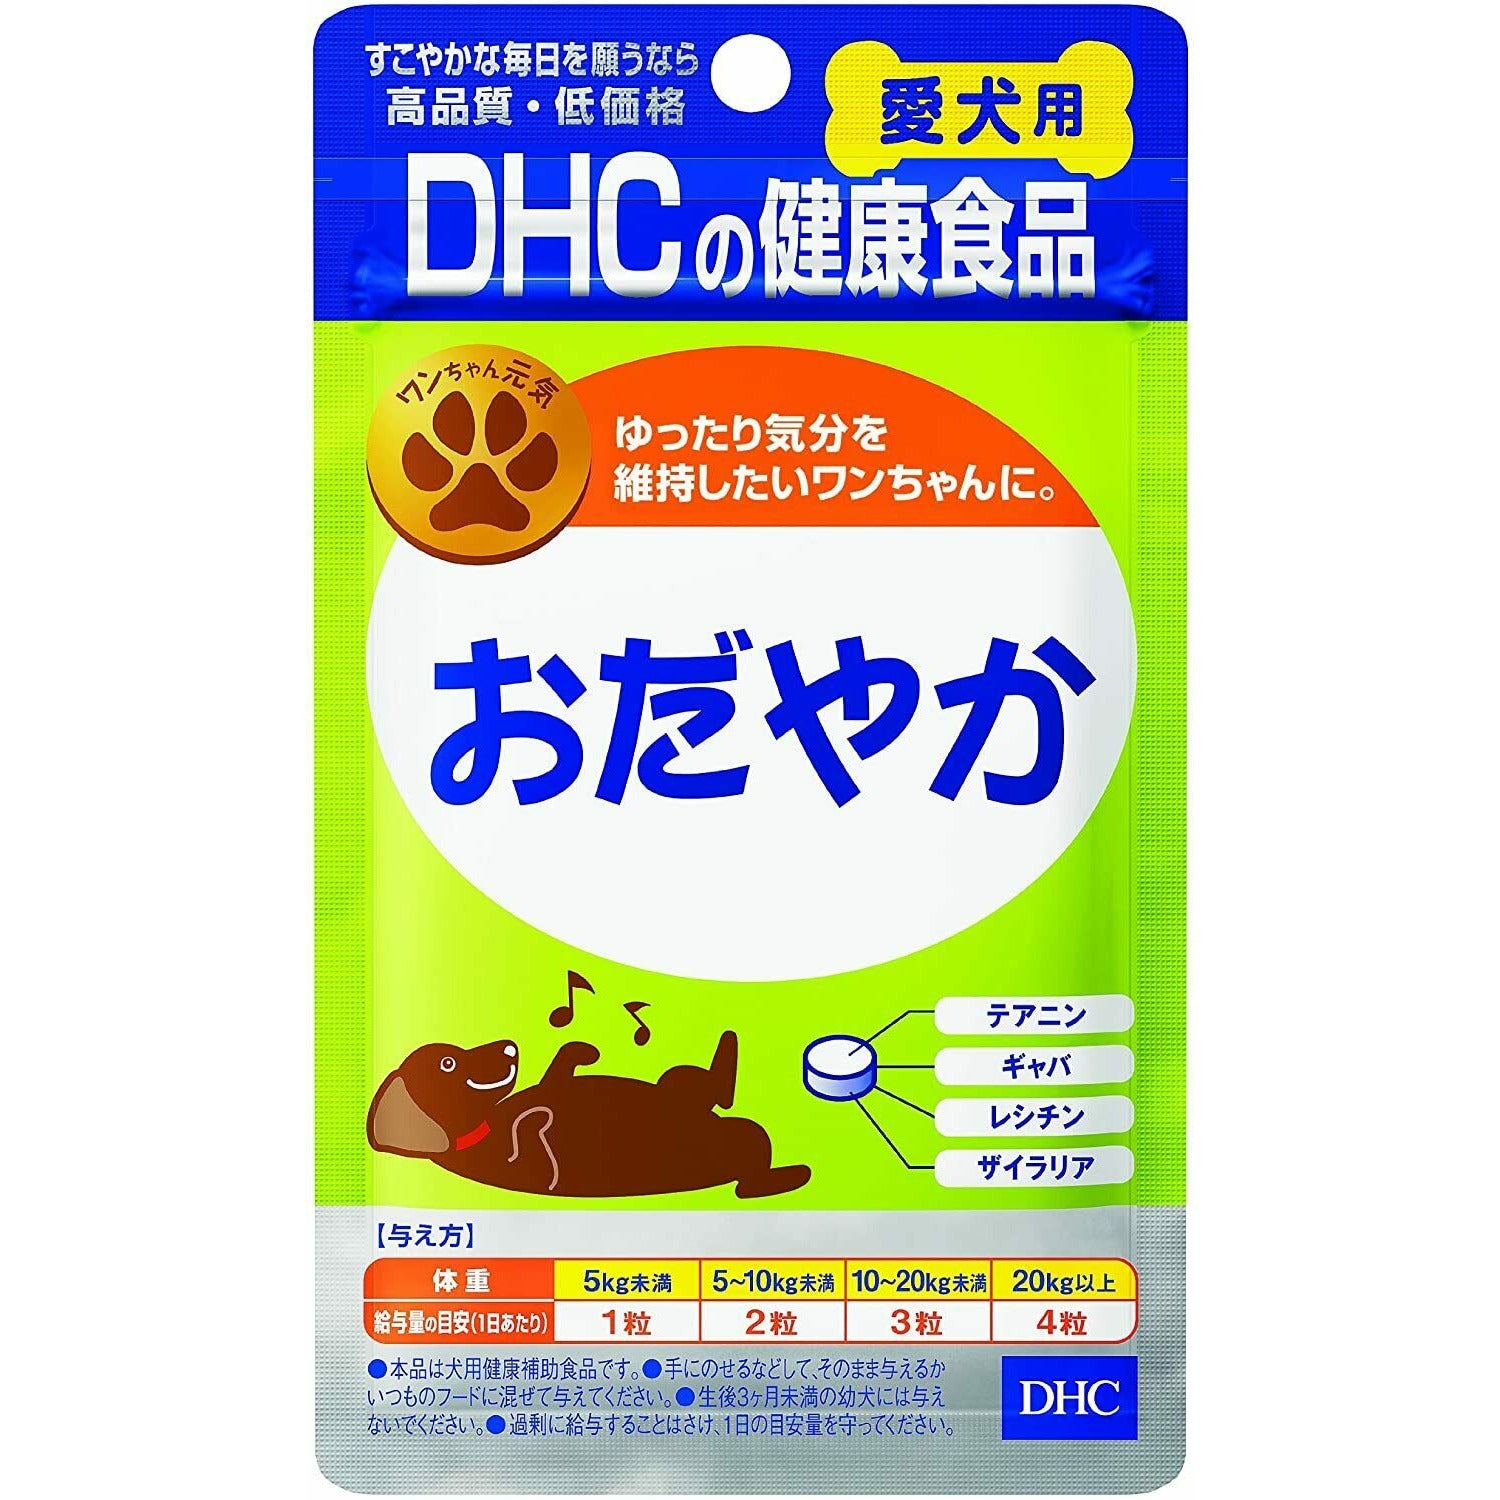 DHC dog for calm (60 Tablets)